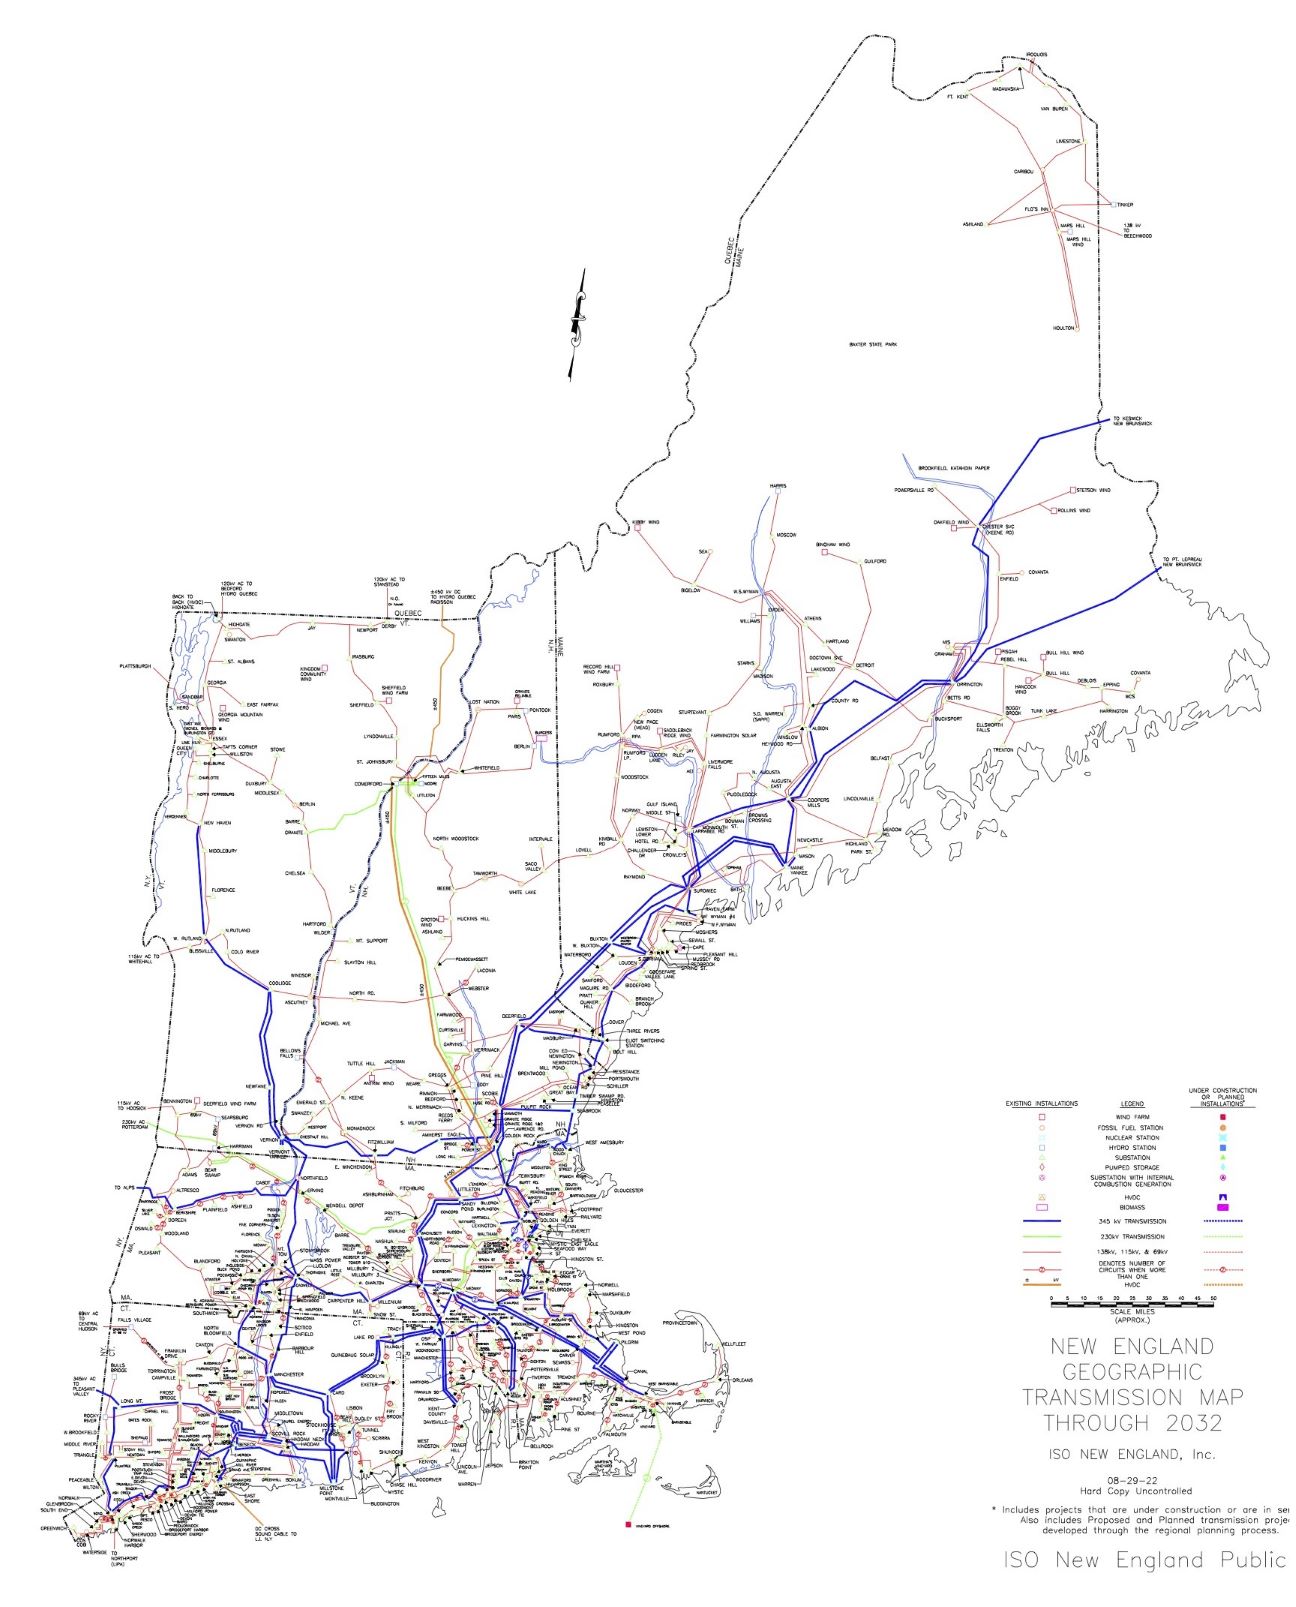 A map shows the New England transmission line system through 2032. 